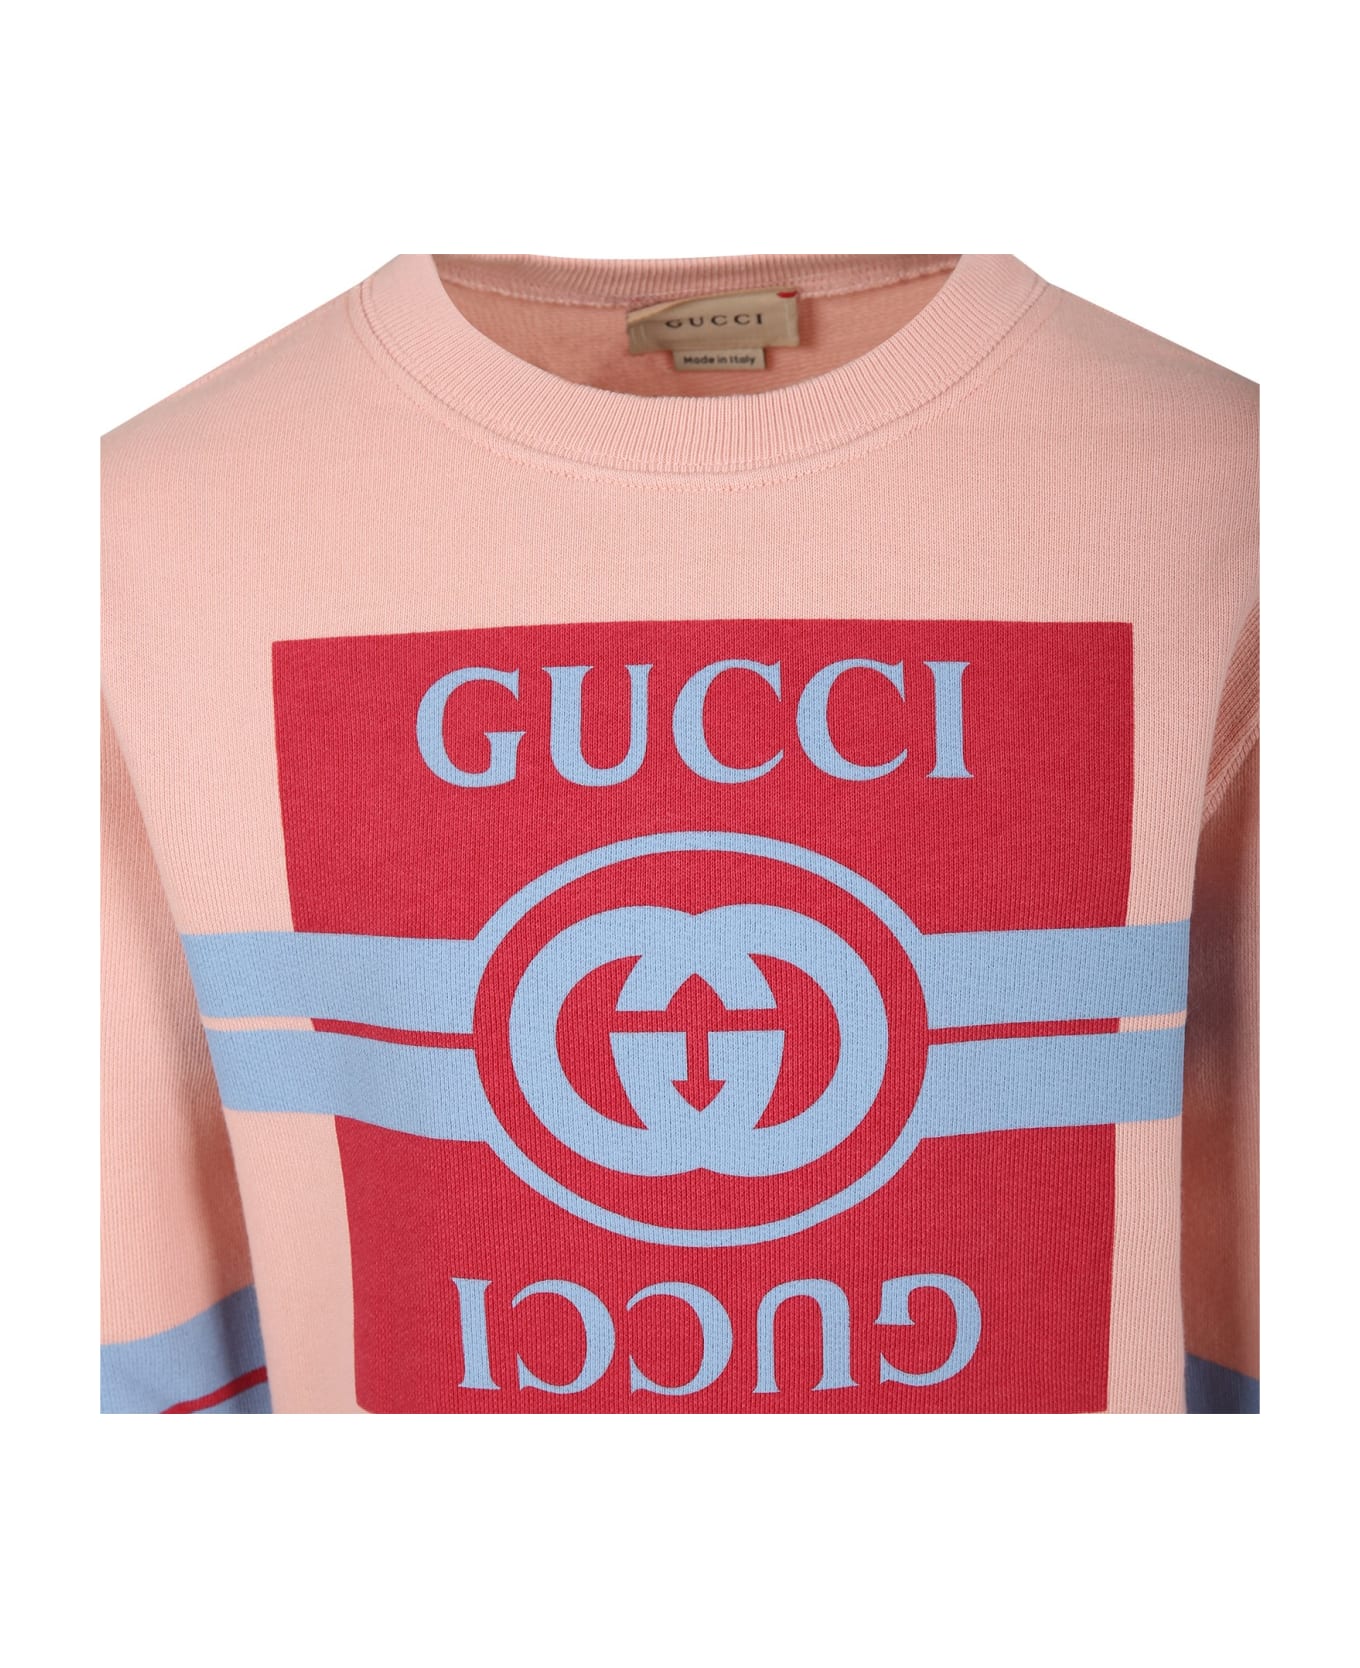 Gucci Rose Sweatshirt For Girl With Logo - PINK